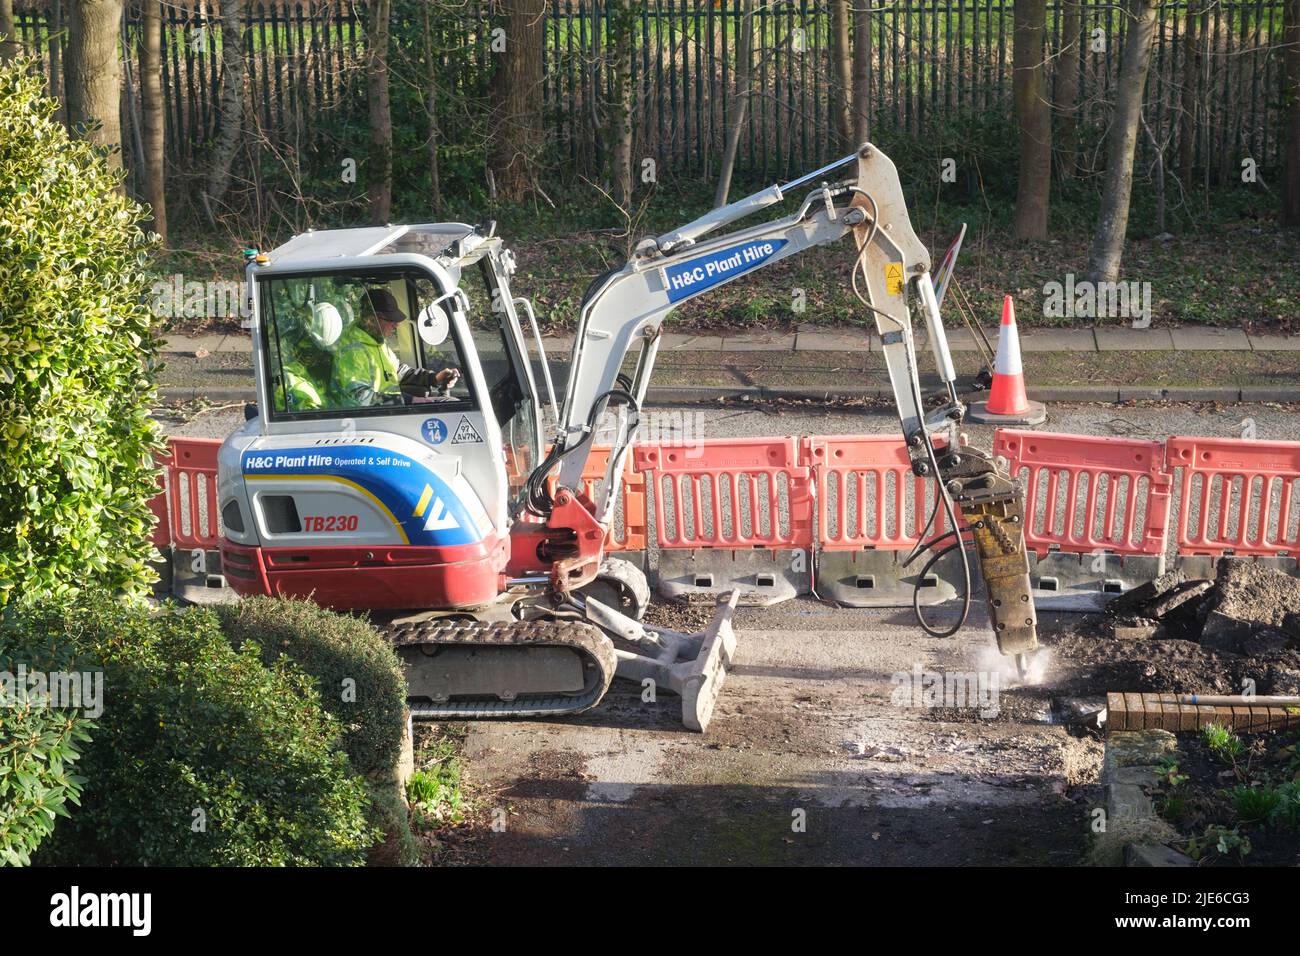 Workman using a mini excavator to dig up a pavement (sidewalk) by a road in a residential area Stock Photo